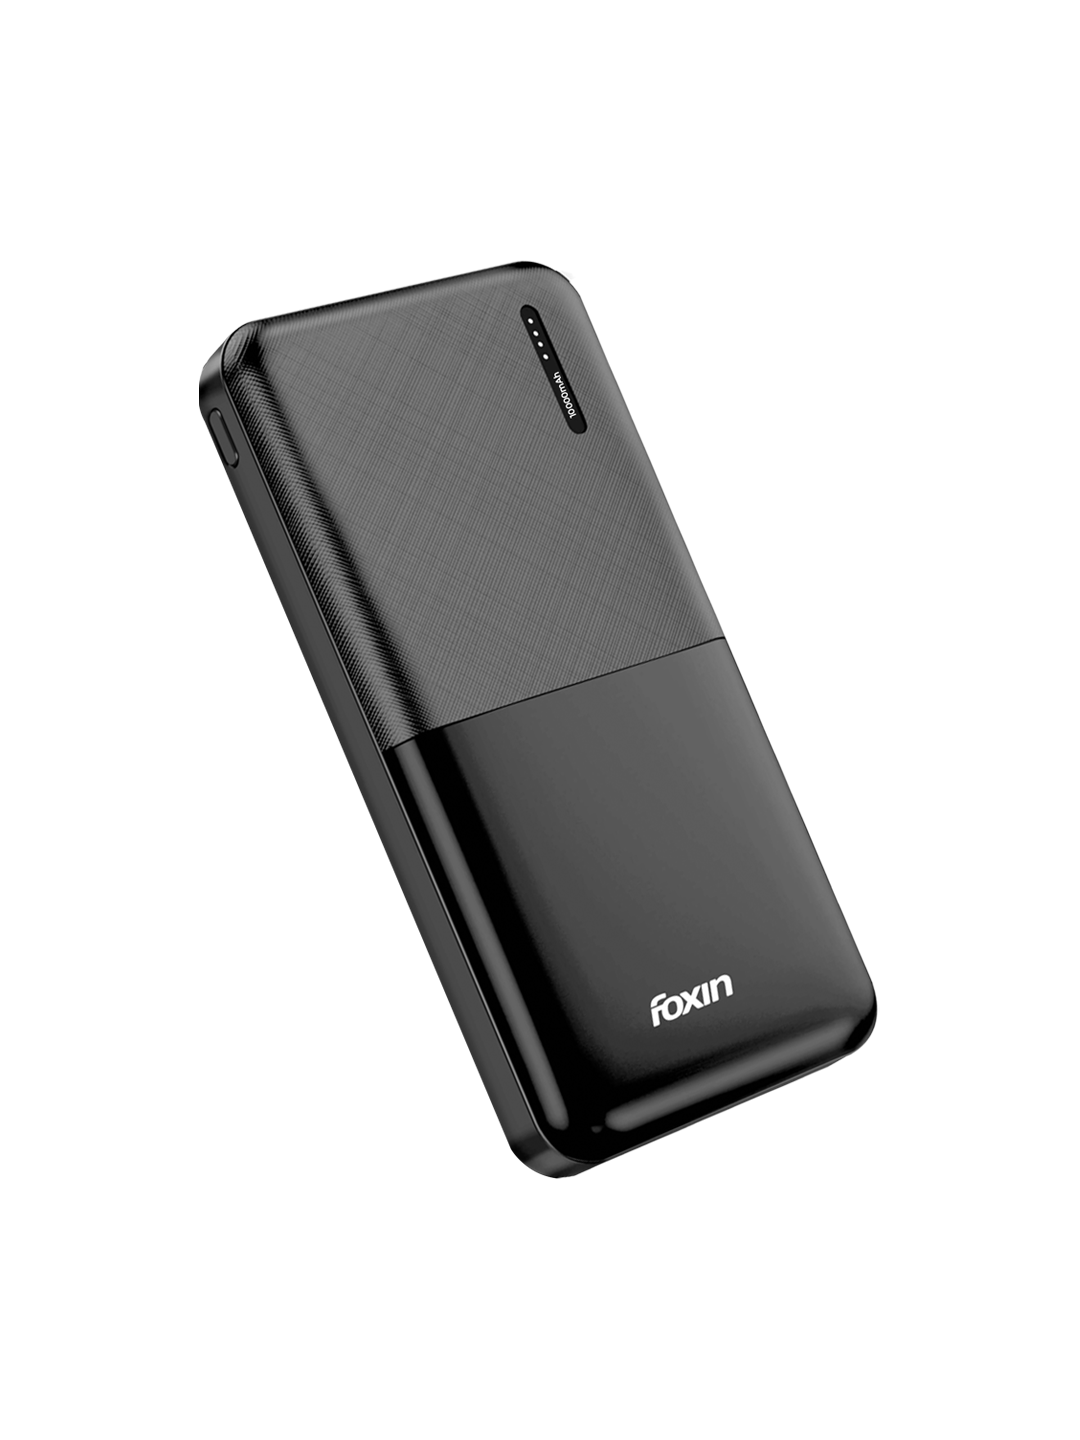 Foxin 10000 mAh 12W Fast Charging Li-Polymer Ultra Power Bank | Dual Micro-USB &amp; Type C Input | BIS Certified | Made in India | 180-Days Warranty | Black (FPB 146 POLY)